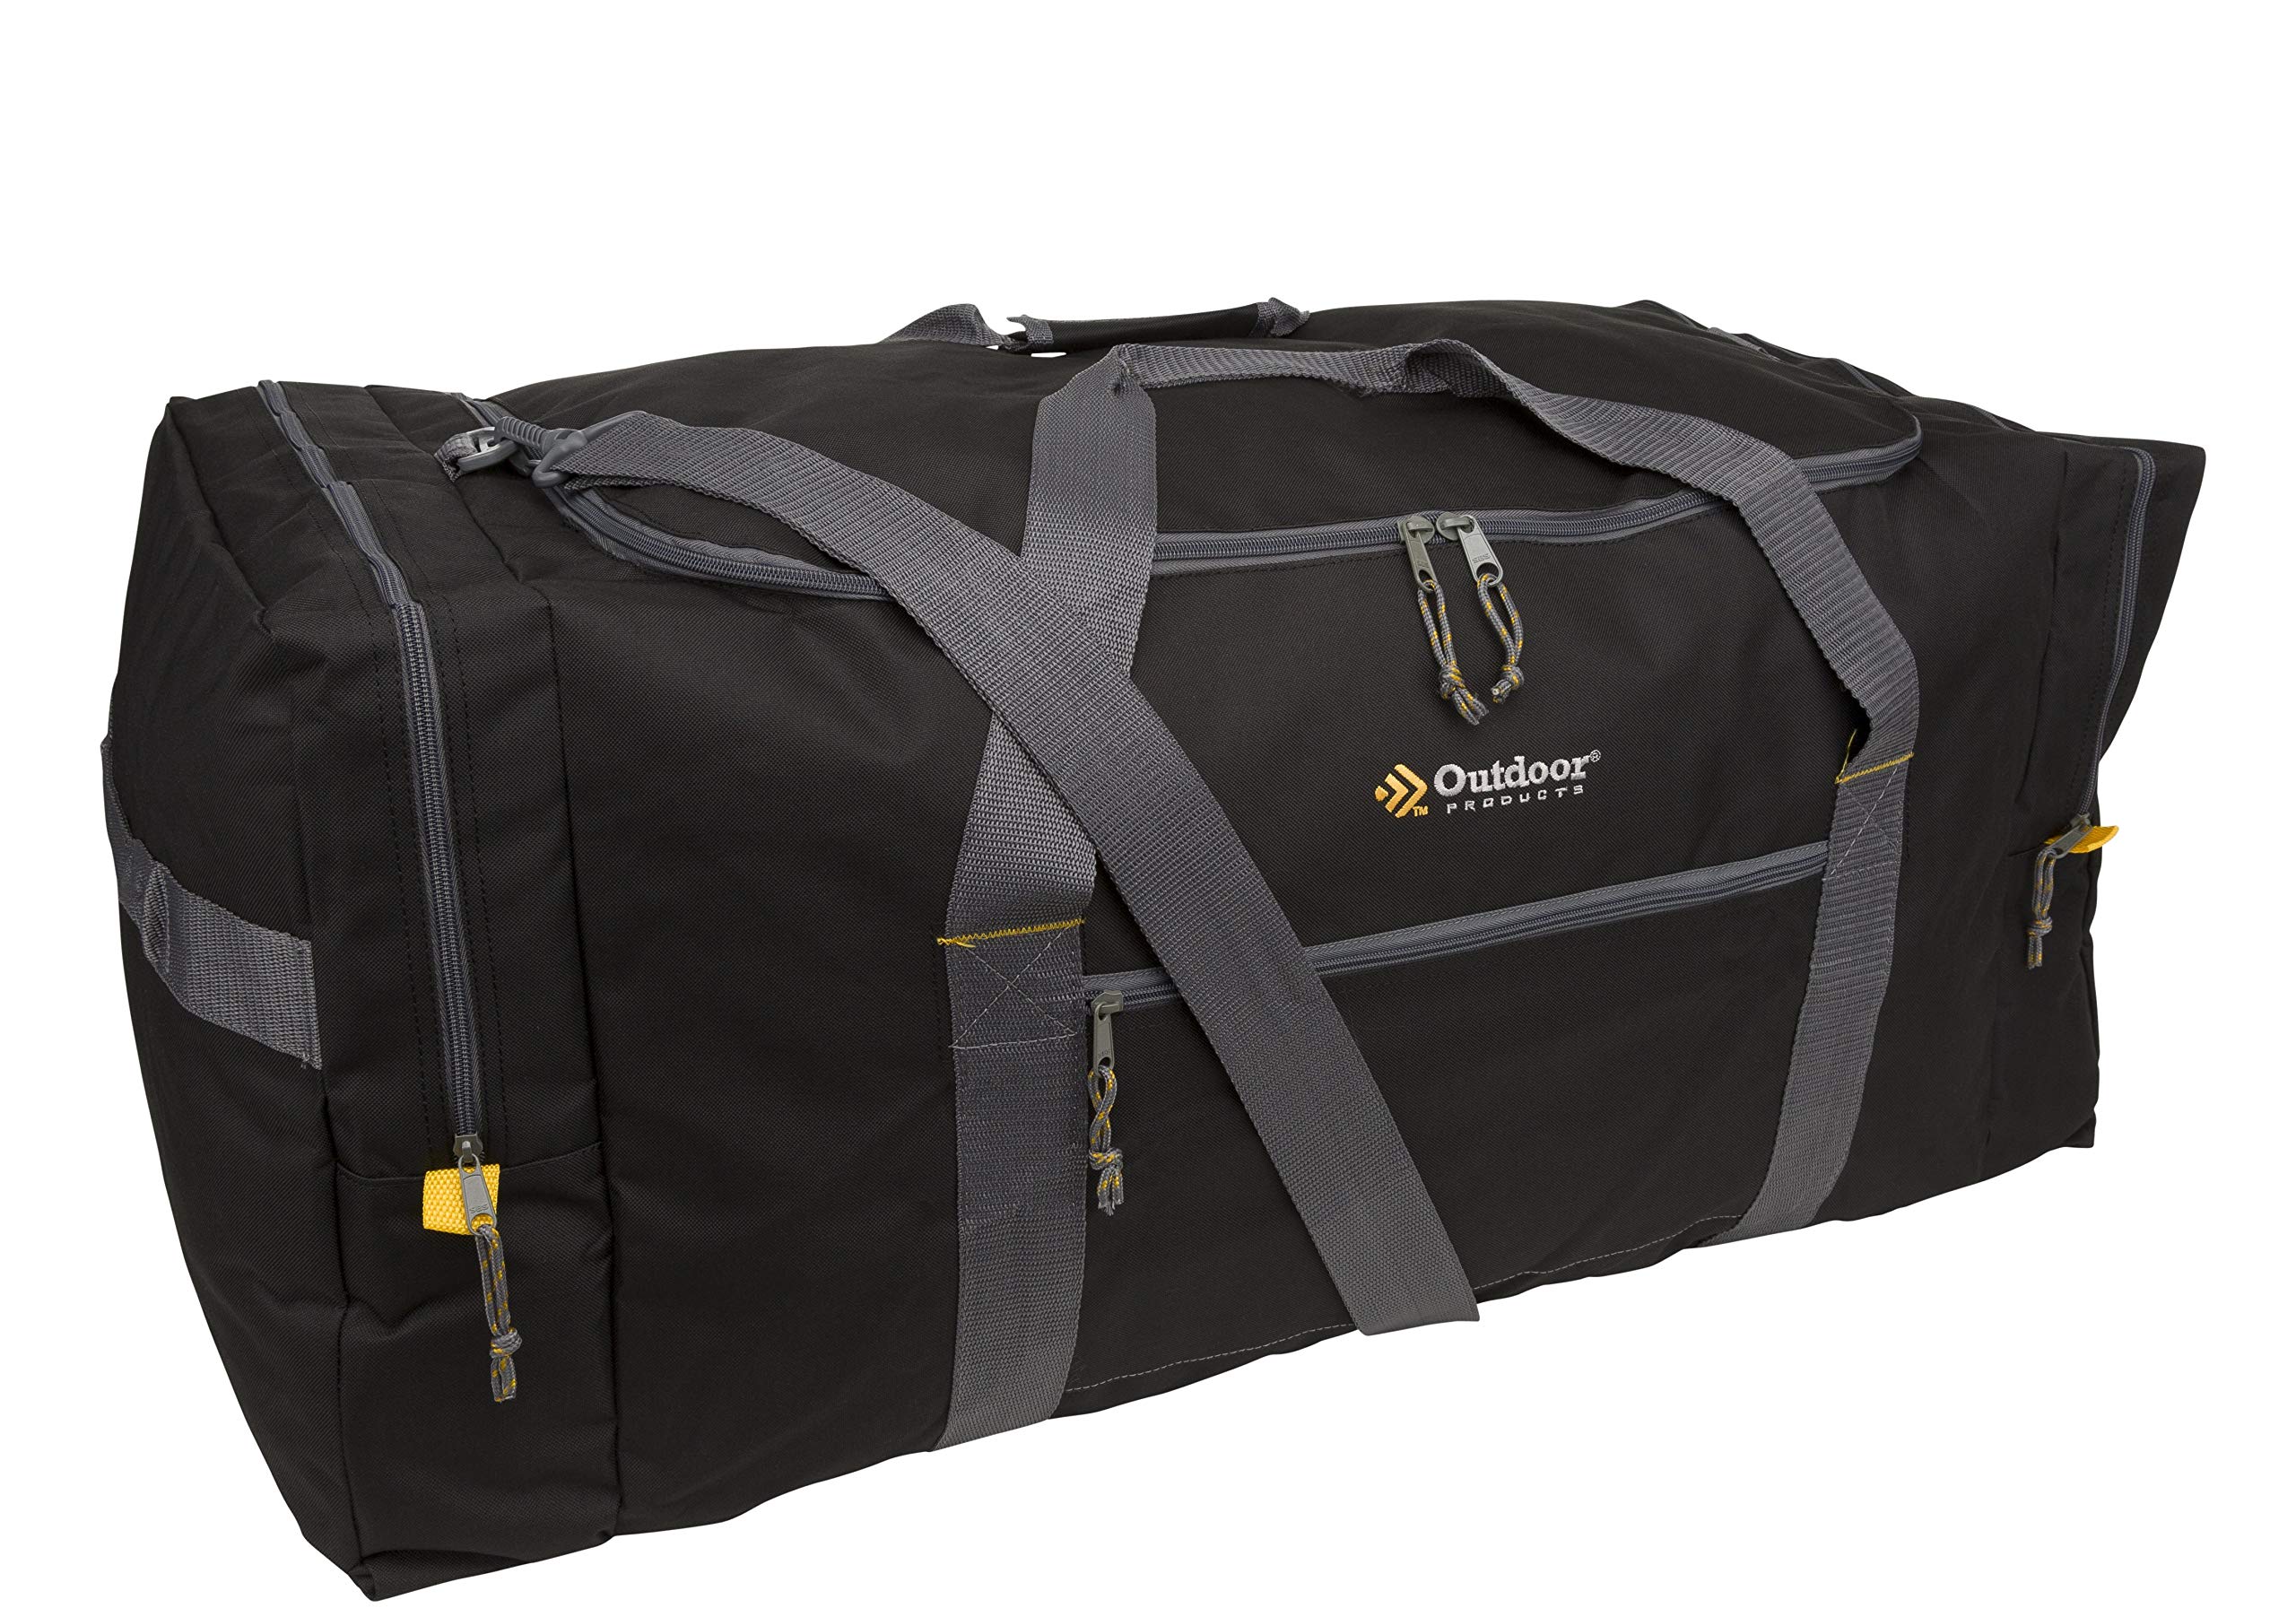 Outdoor Products Blaze Outdoor Products Outdoor Products 604735 Medium 12in. x 24in. Mountain Duffle - Black